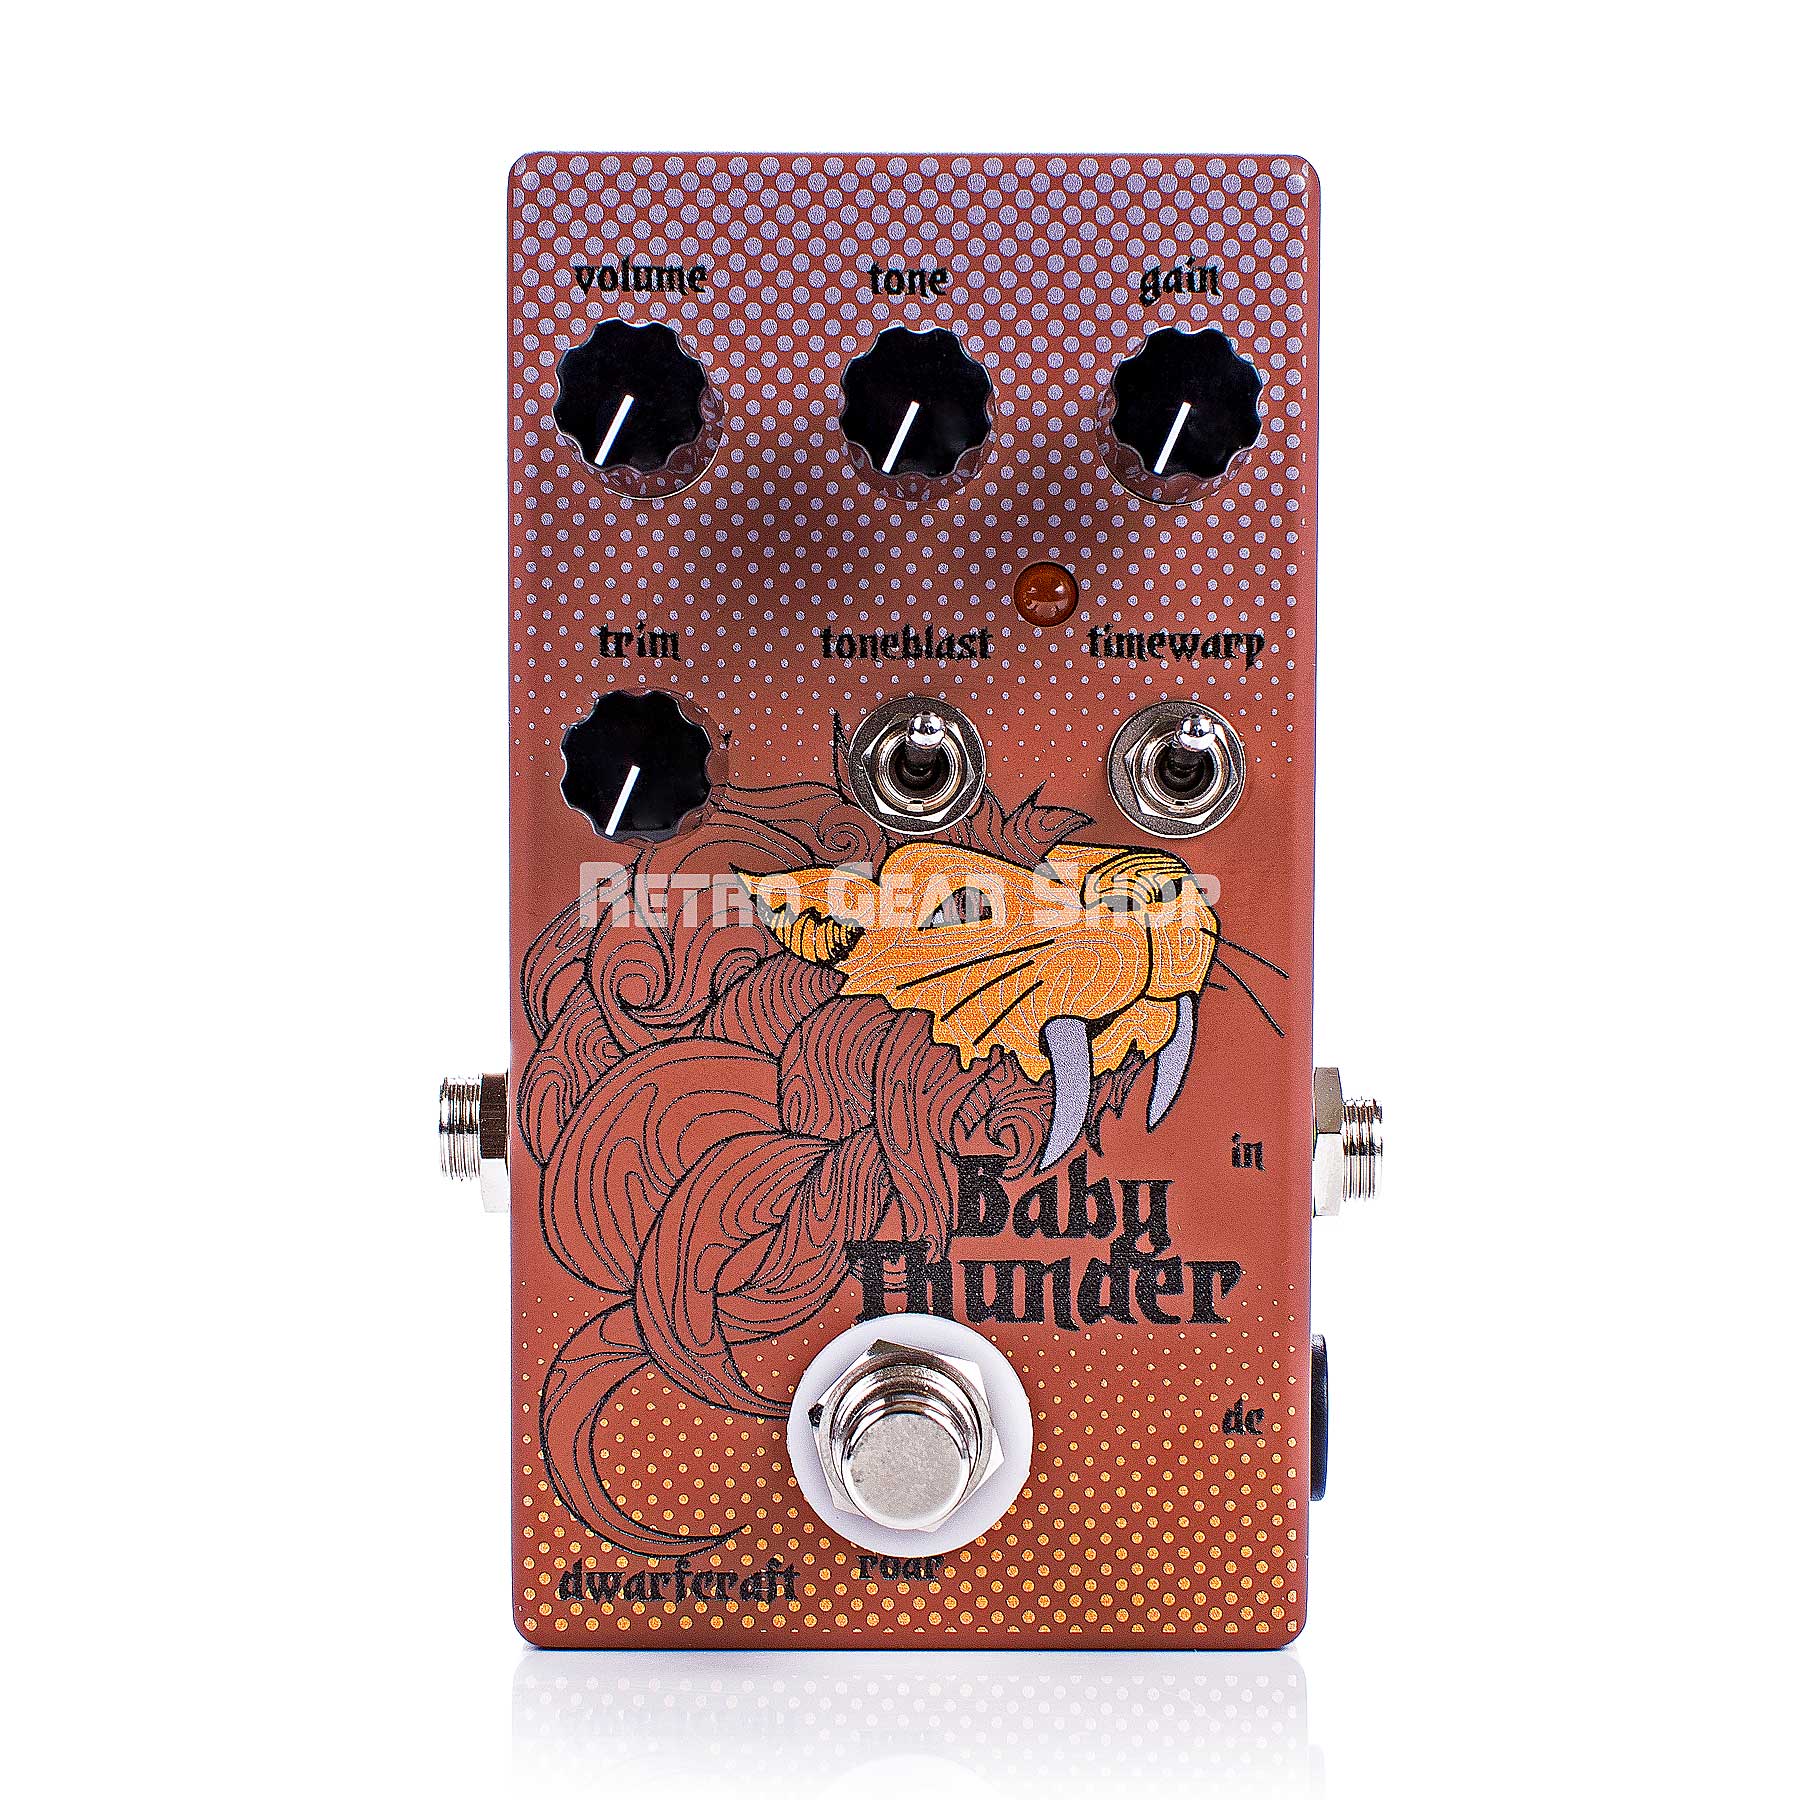 Dwarfcraft Devices Baby Thunder Limited Fuzz Guitar Effect Pedal 